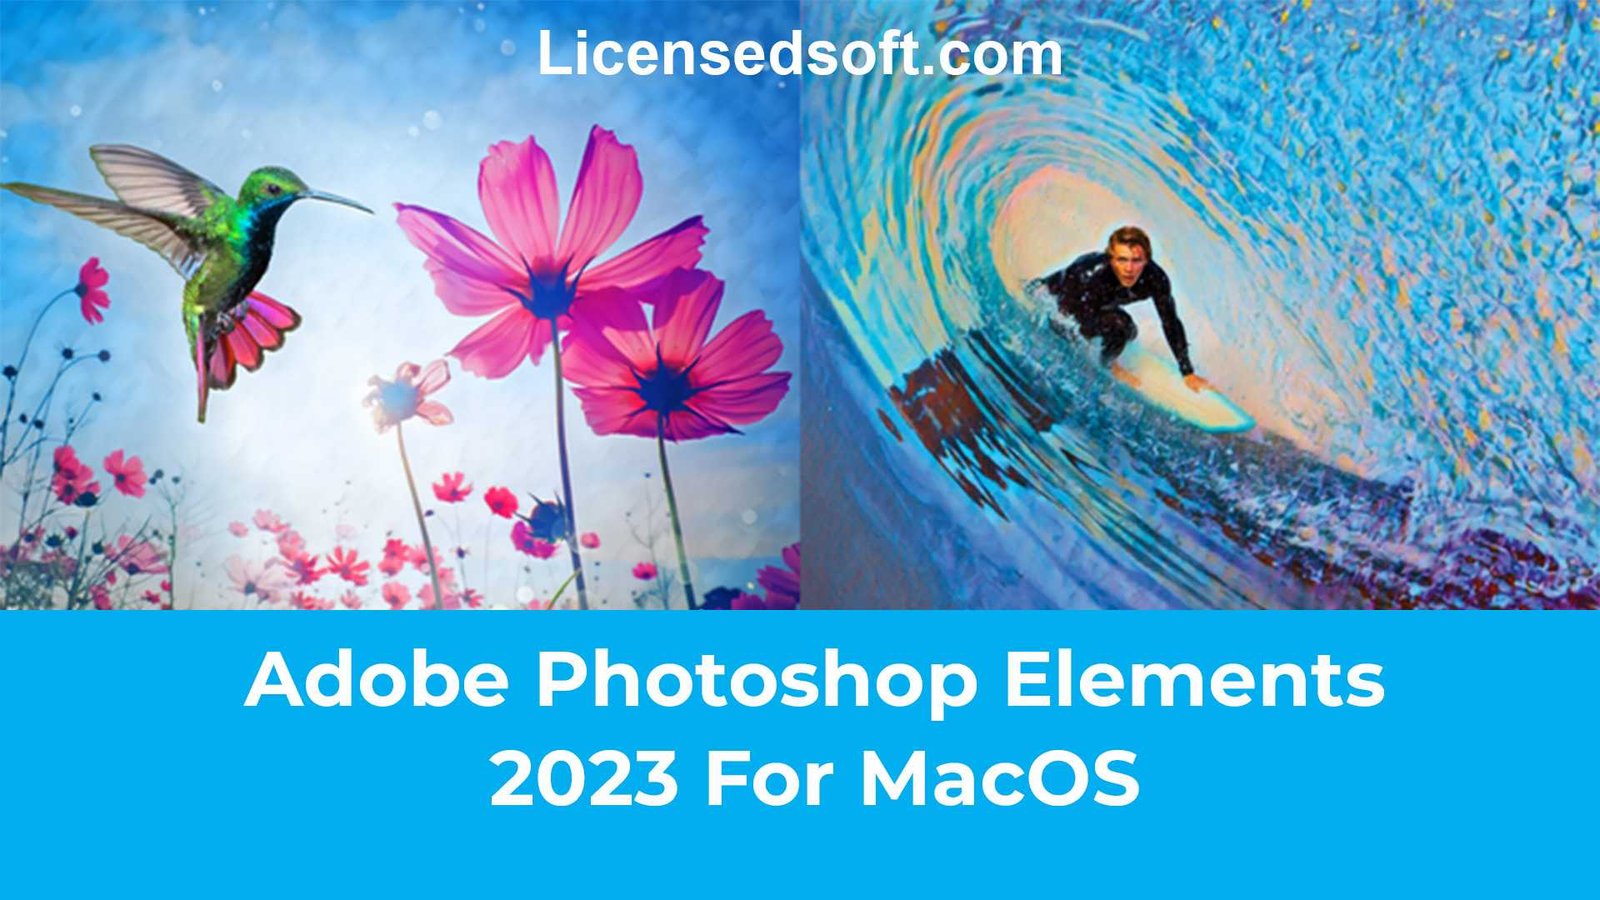 Adobe Photoshop Elements 2023 For MacOS Lifetime Premium cover photo by licensedsoft.com